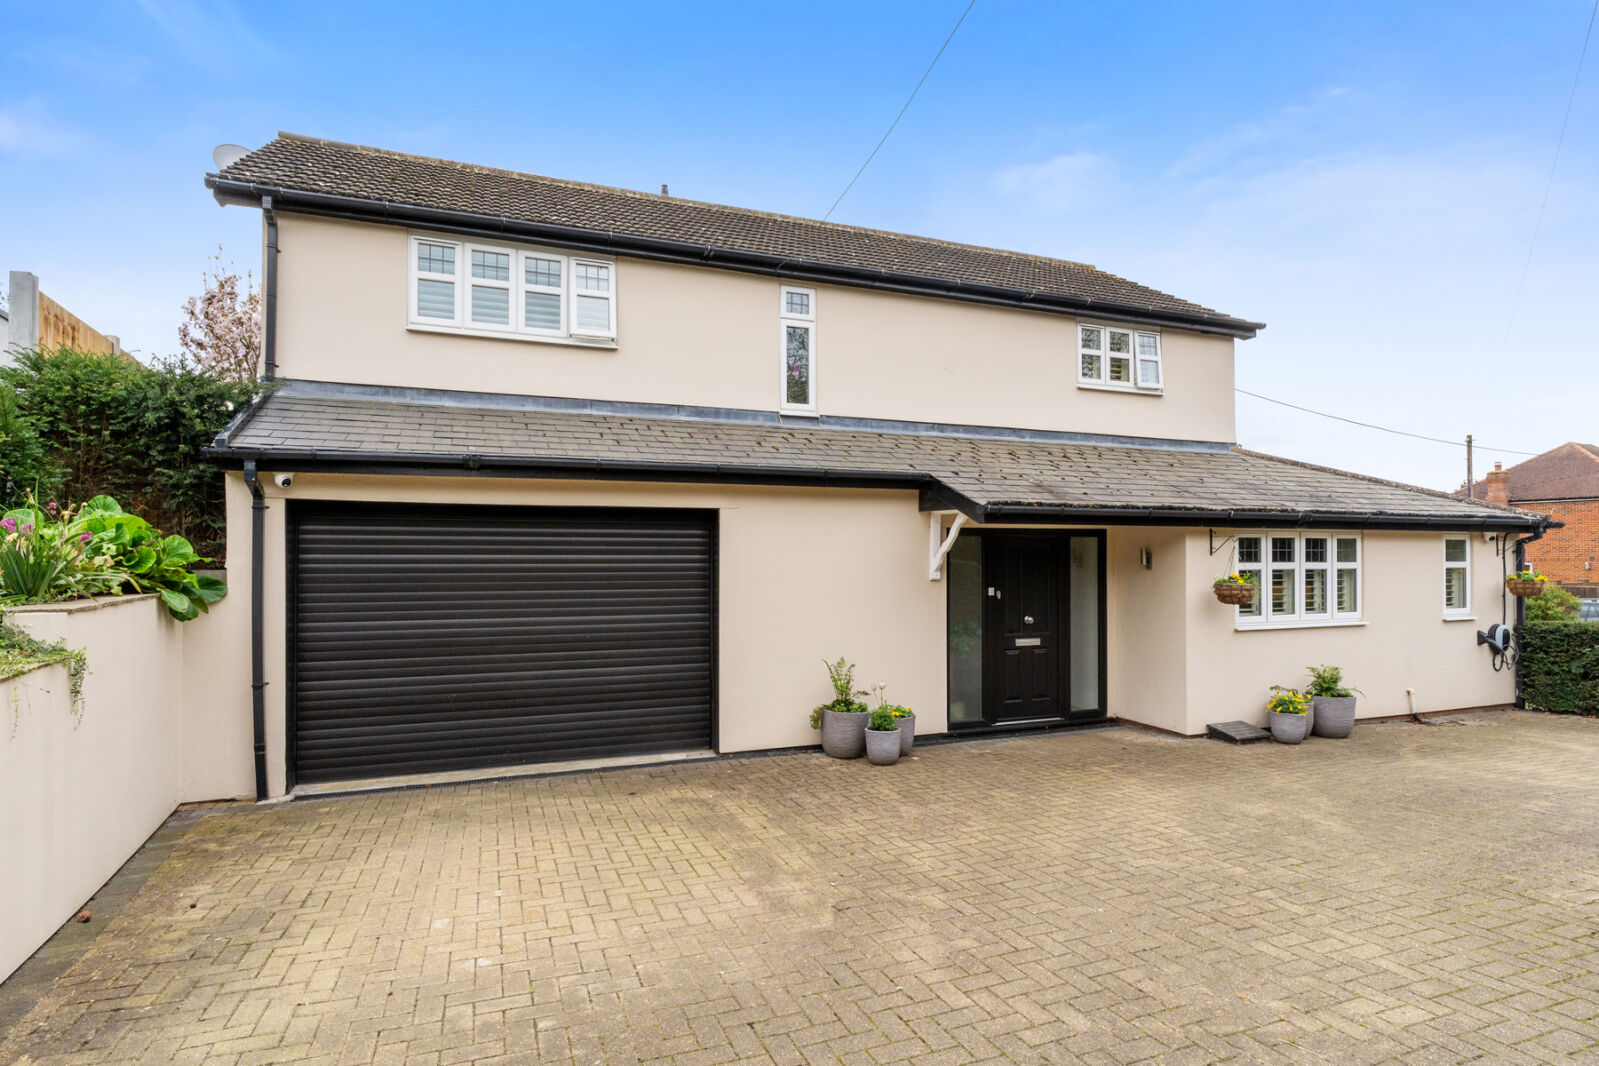 5 bedroom detached house for sale Rayne Road, Braintree, CM7, main image